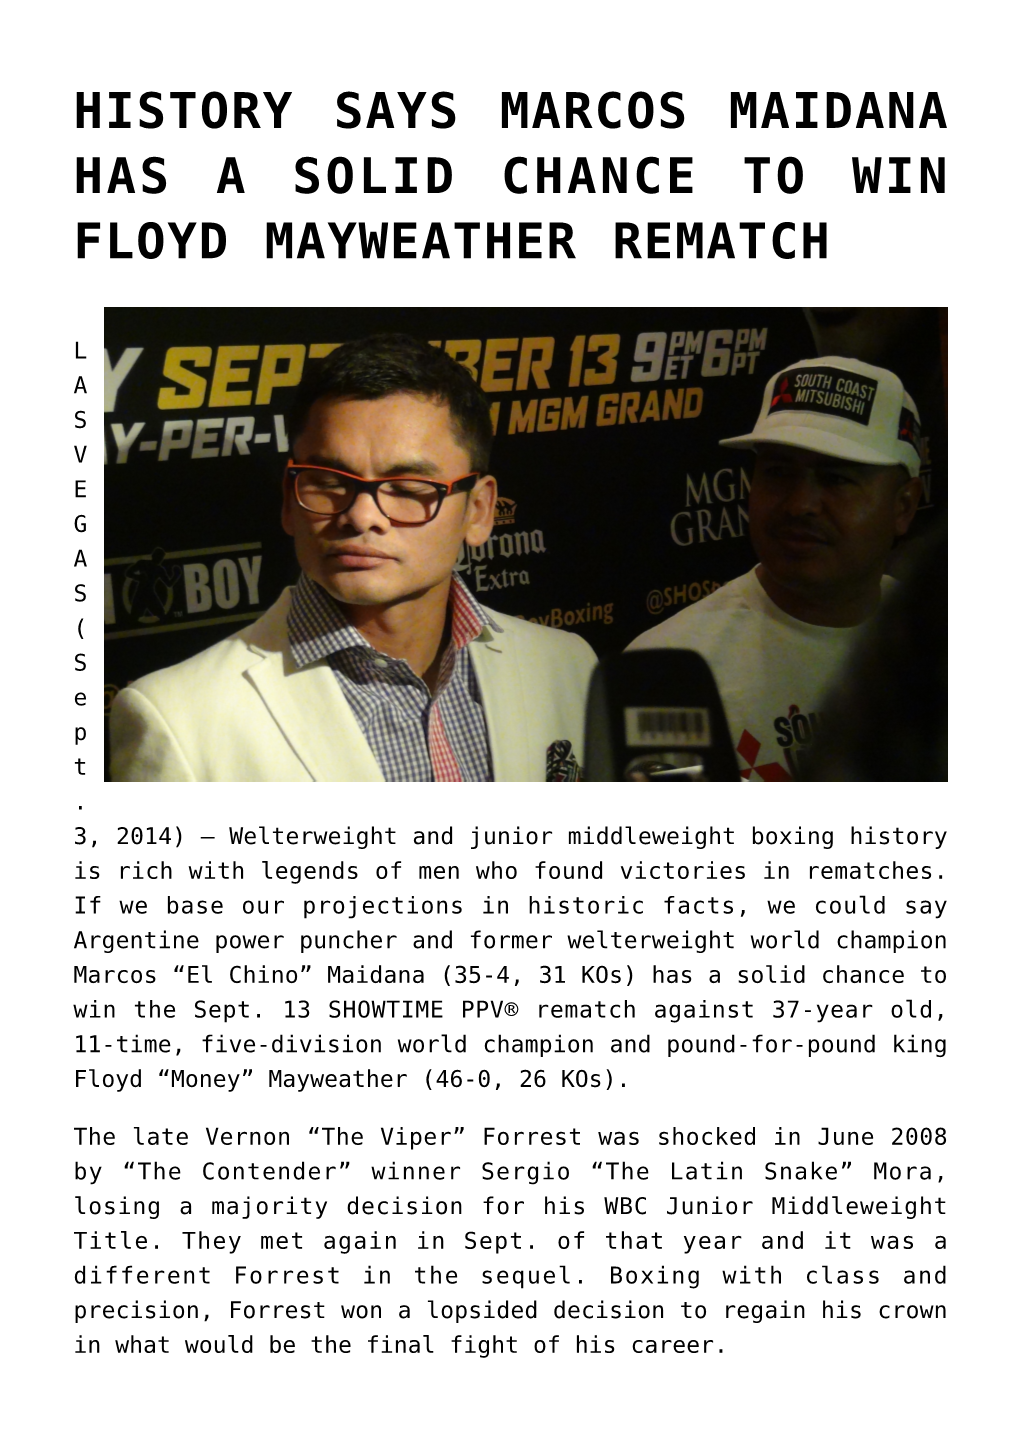 History Says Marcos Maidana Has a Solid Chance to Win Floyd Mayweather Rematch